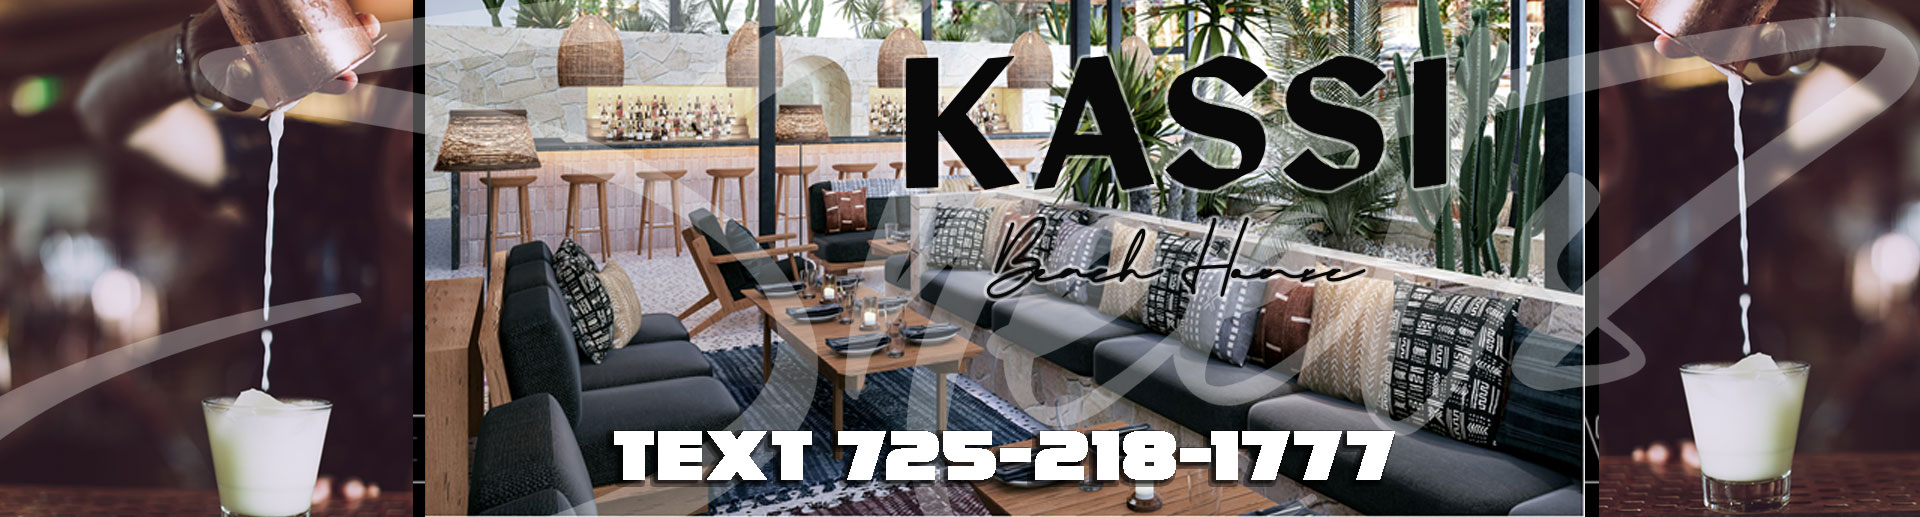 Kassie Beach House brunch house reservations daybeds